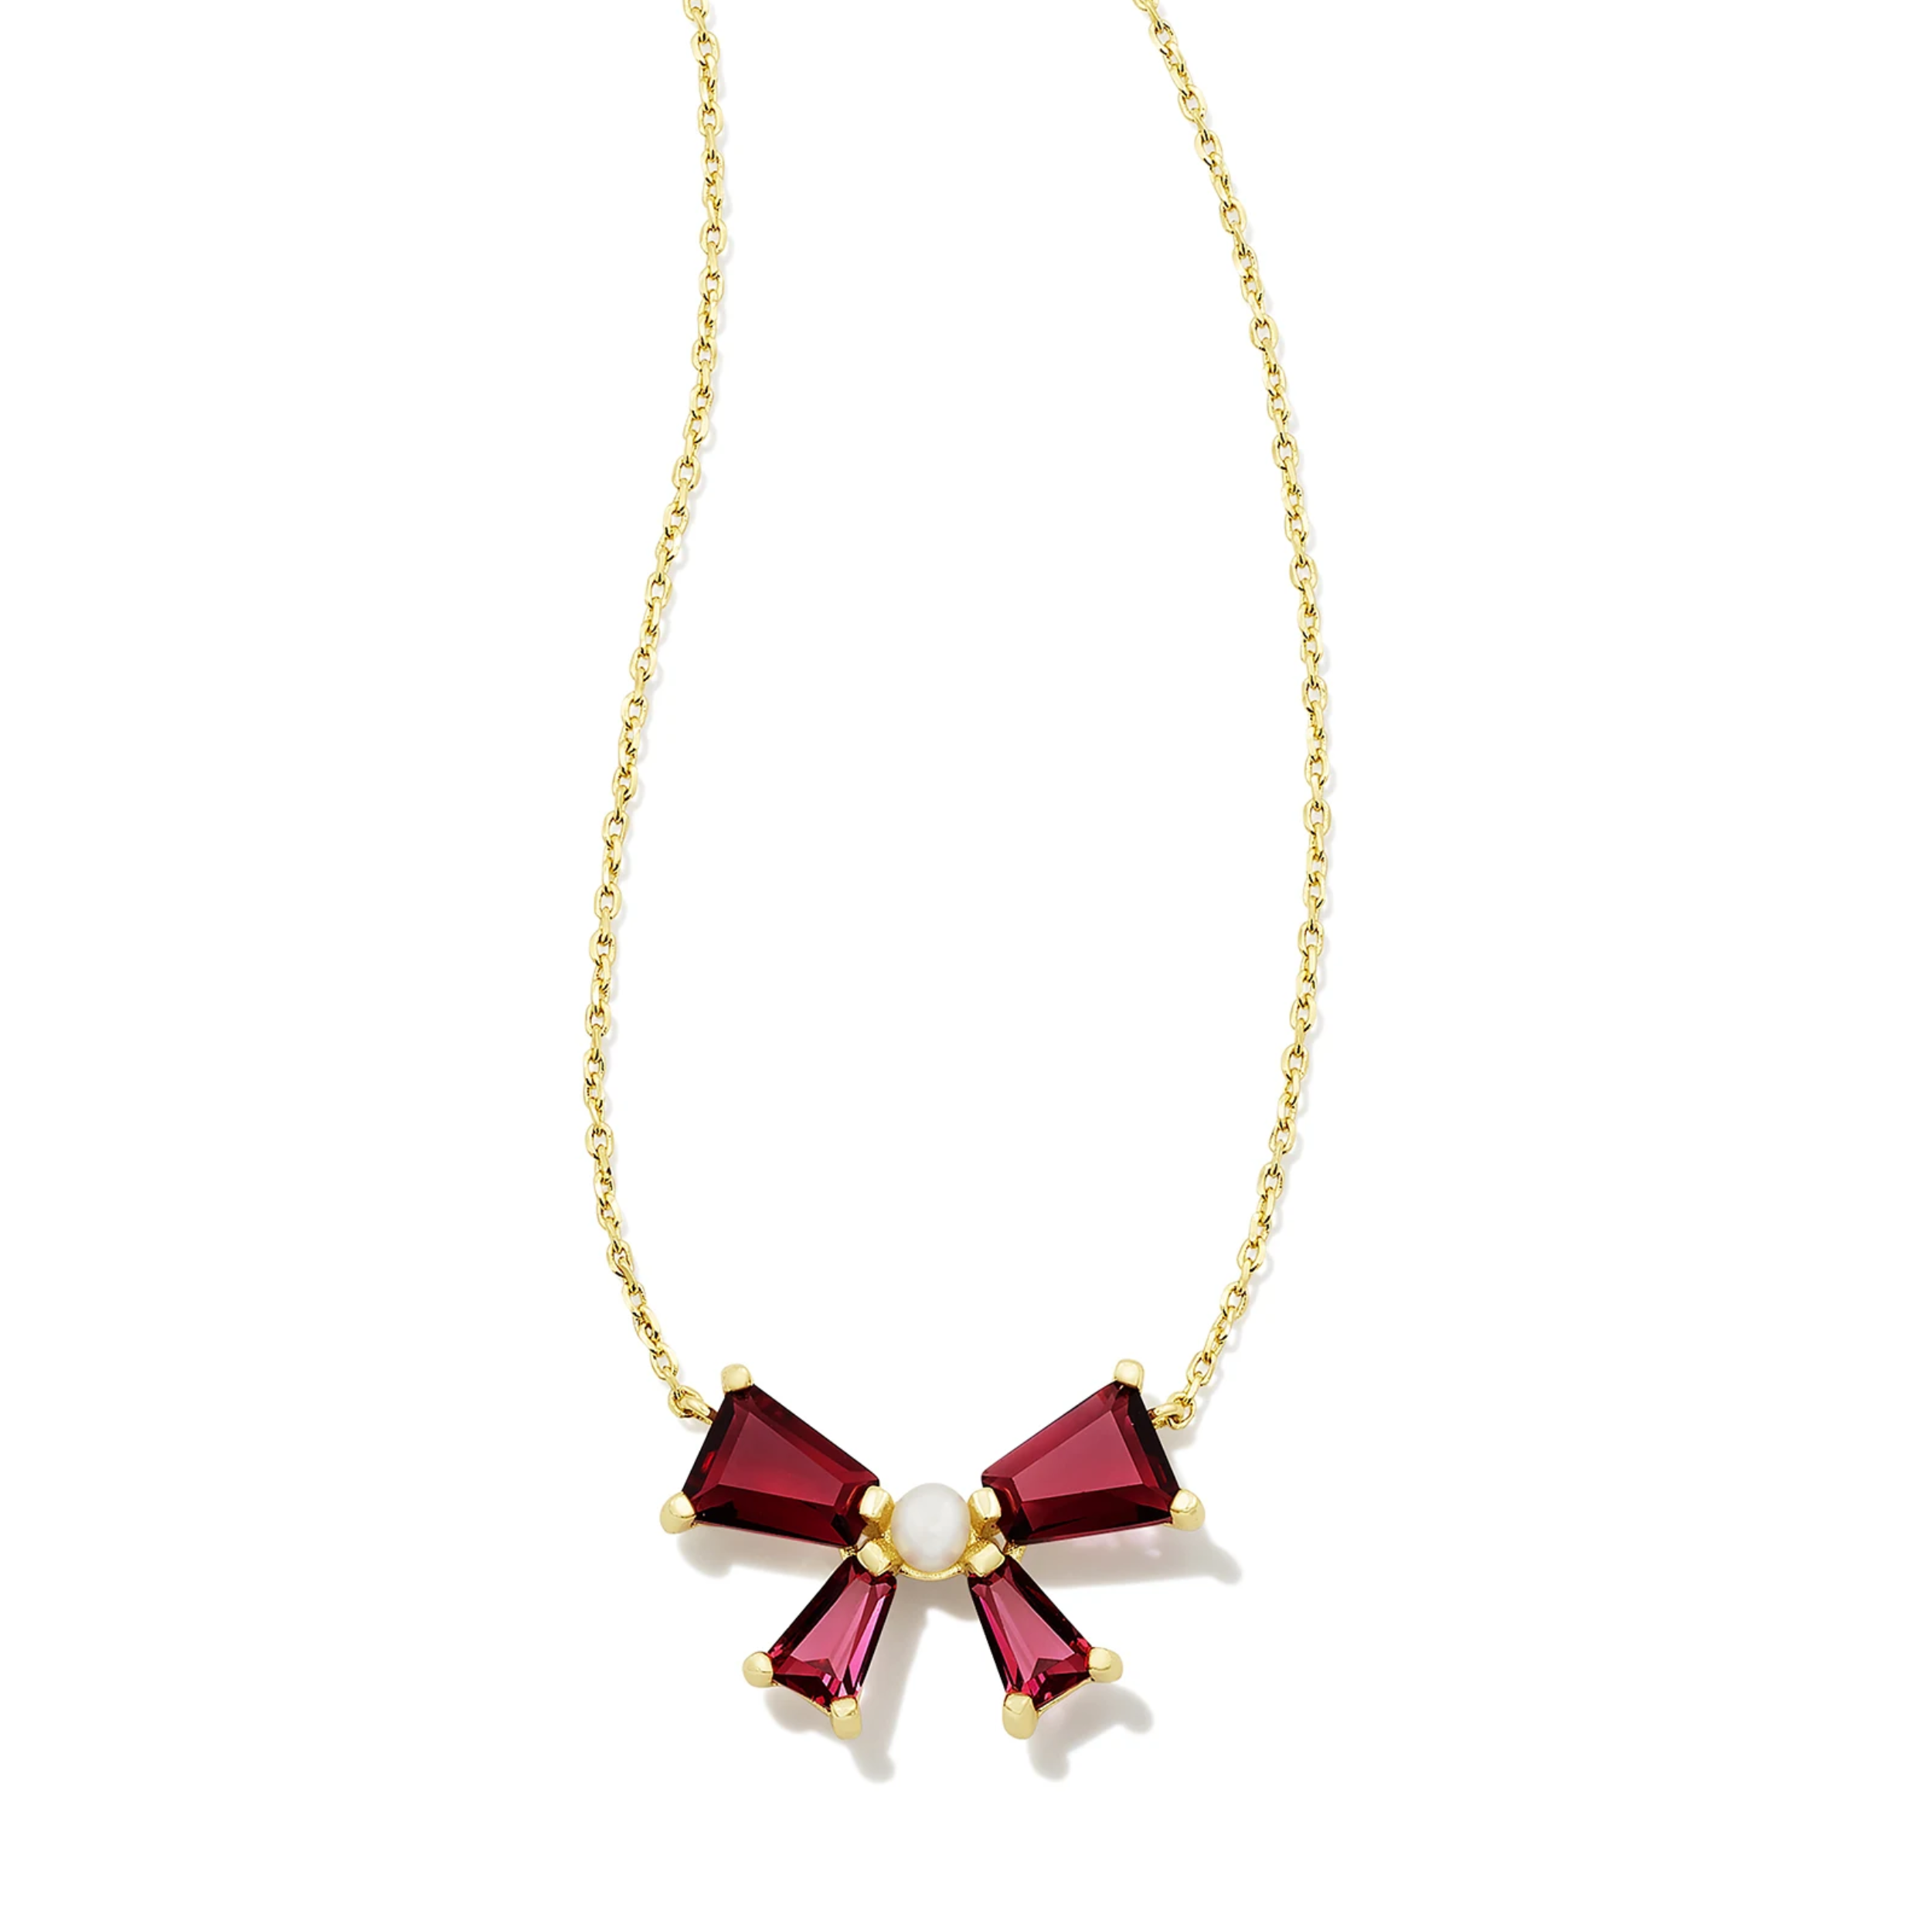 This Blair Gold Bow Pendant Necklace in Red Mix by Kendra Scott is pictured on a white background.